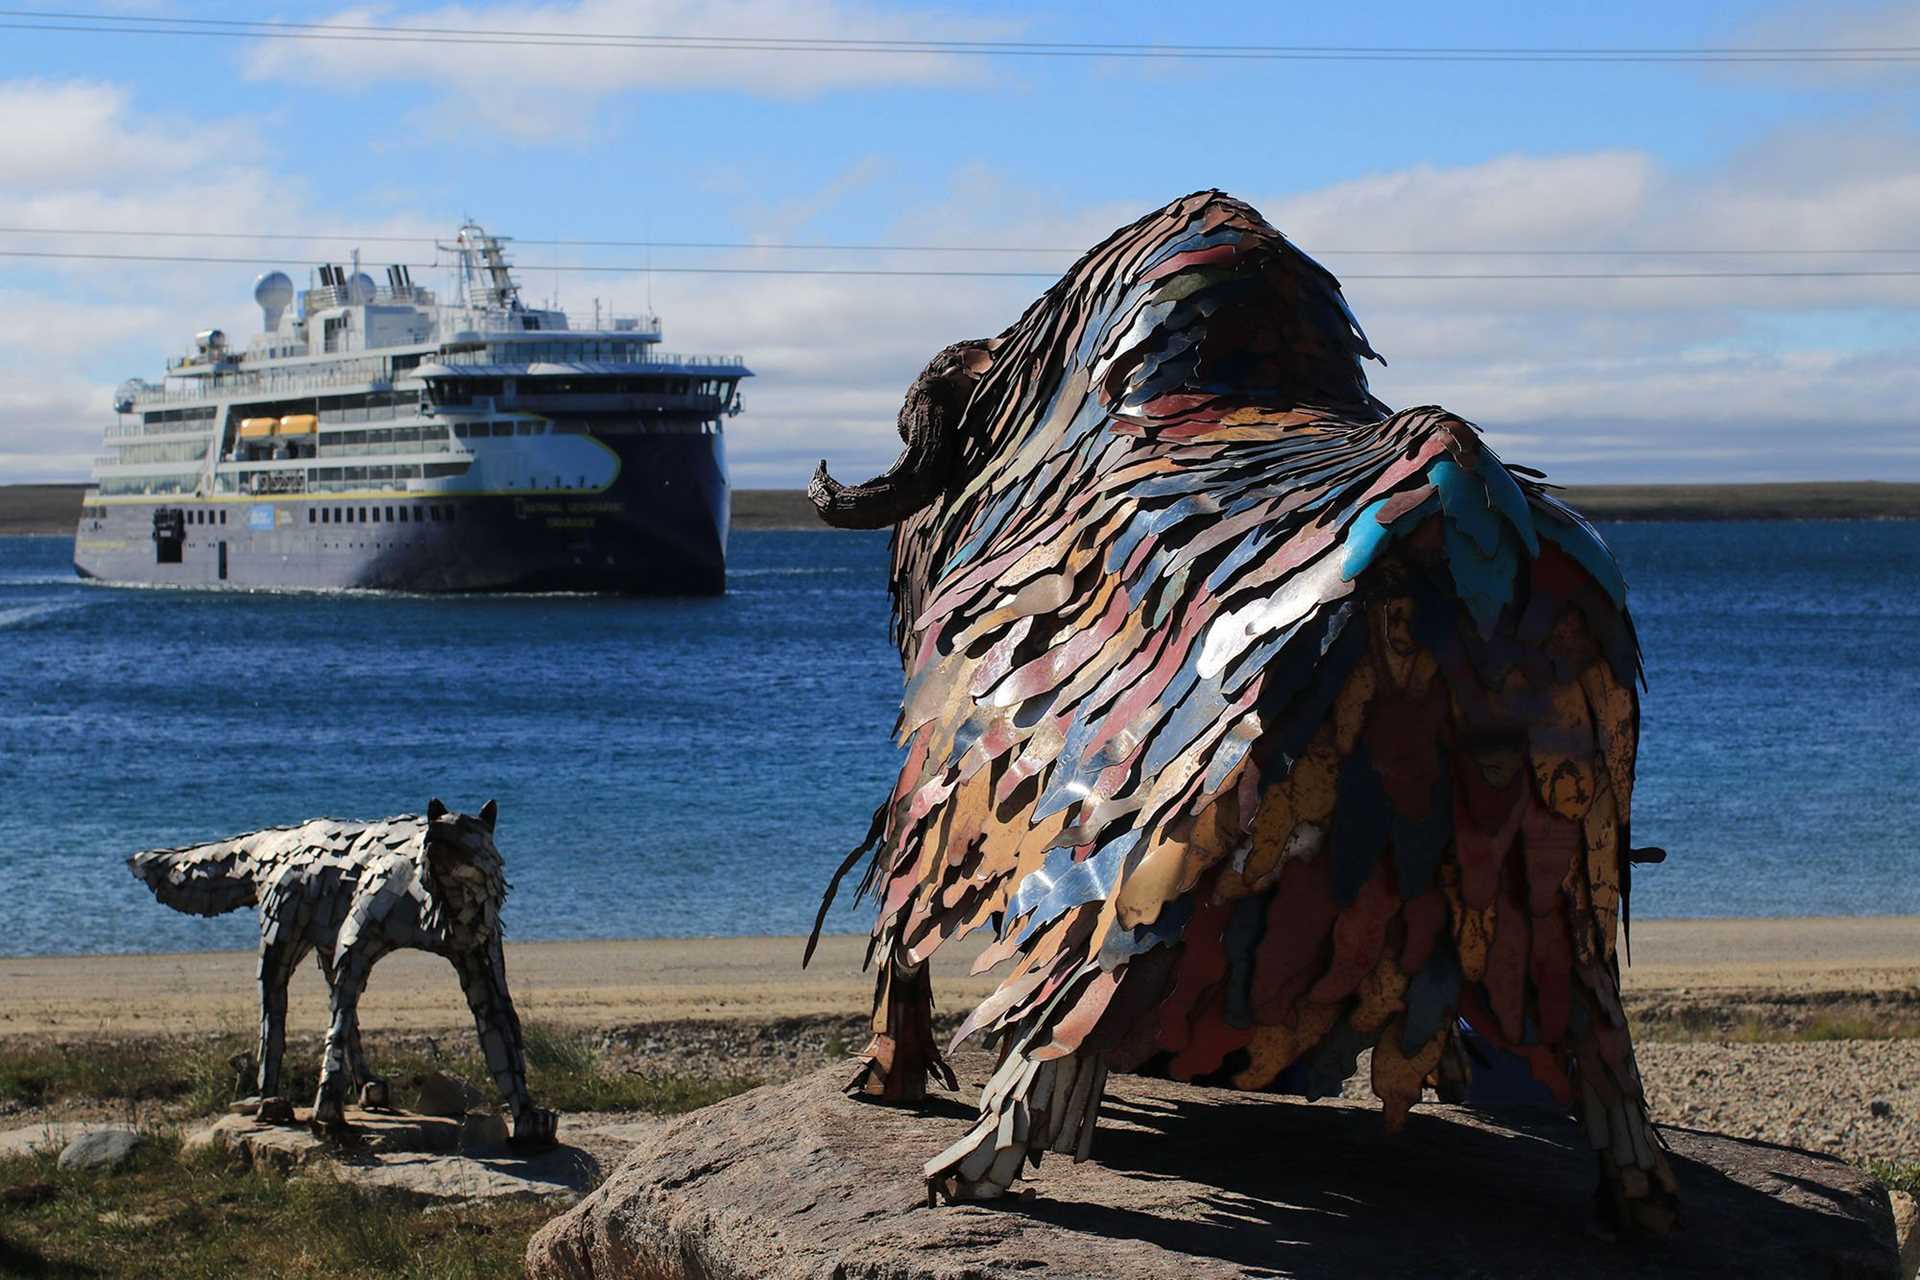 metal sculpture of bison and wolf with ship in background